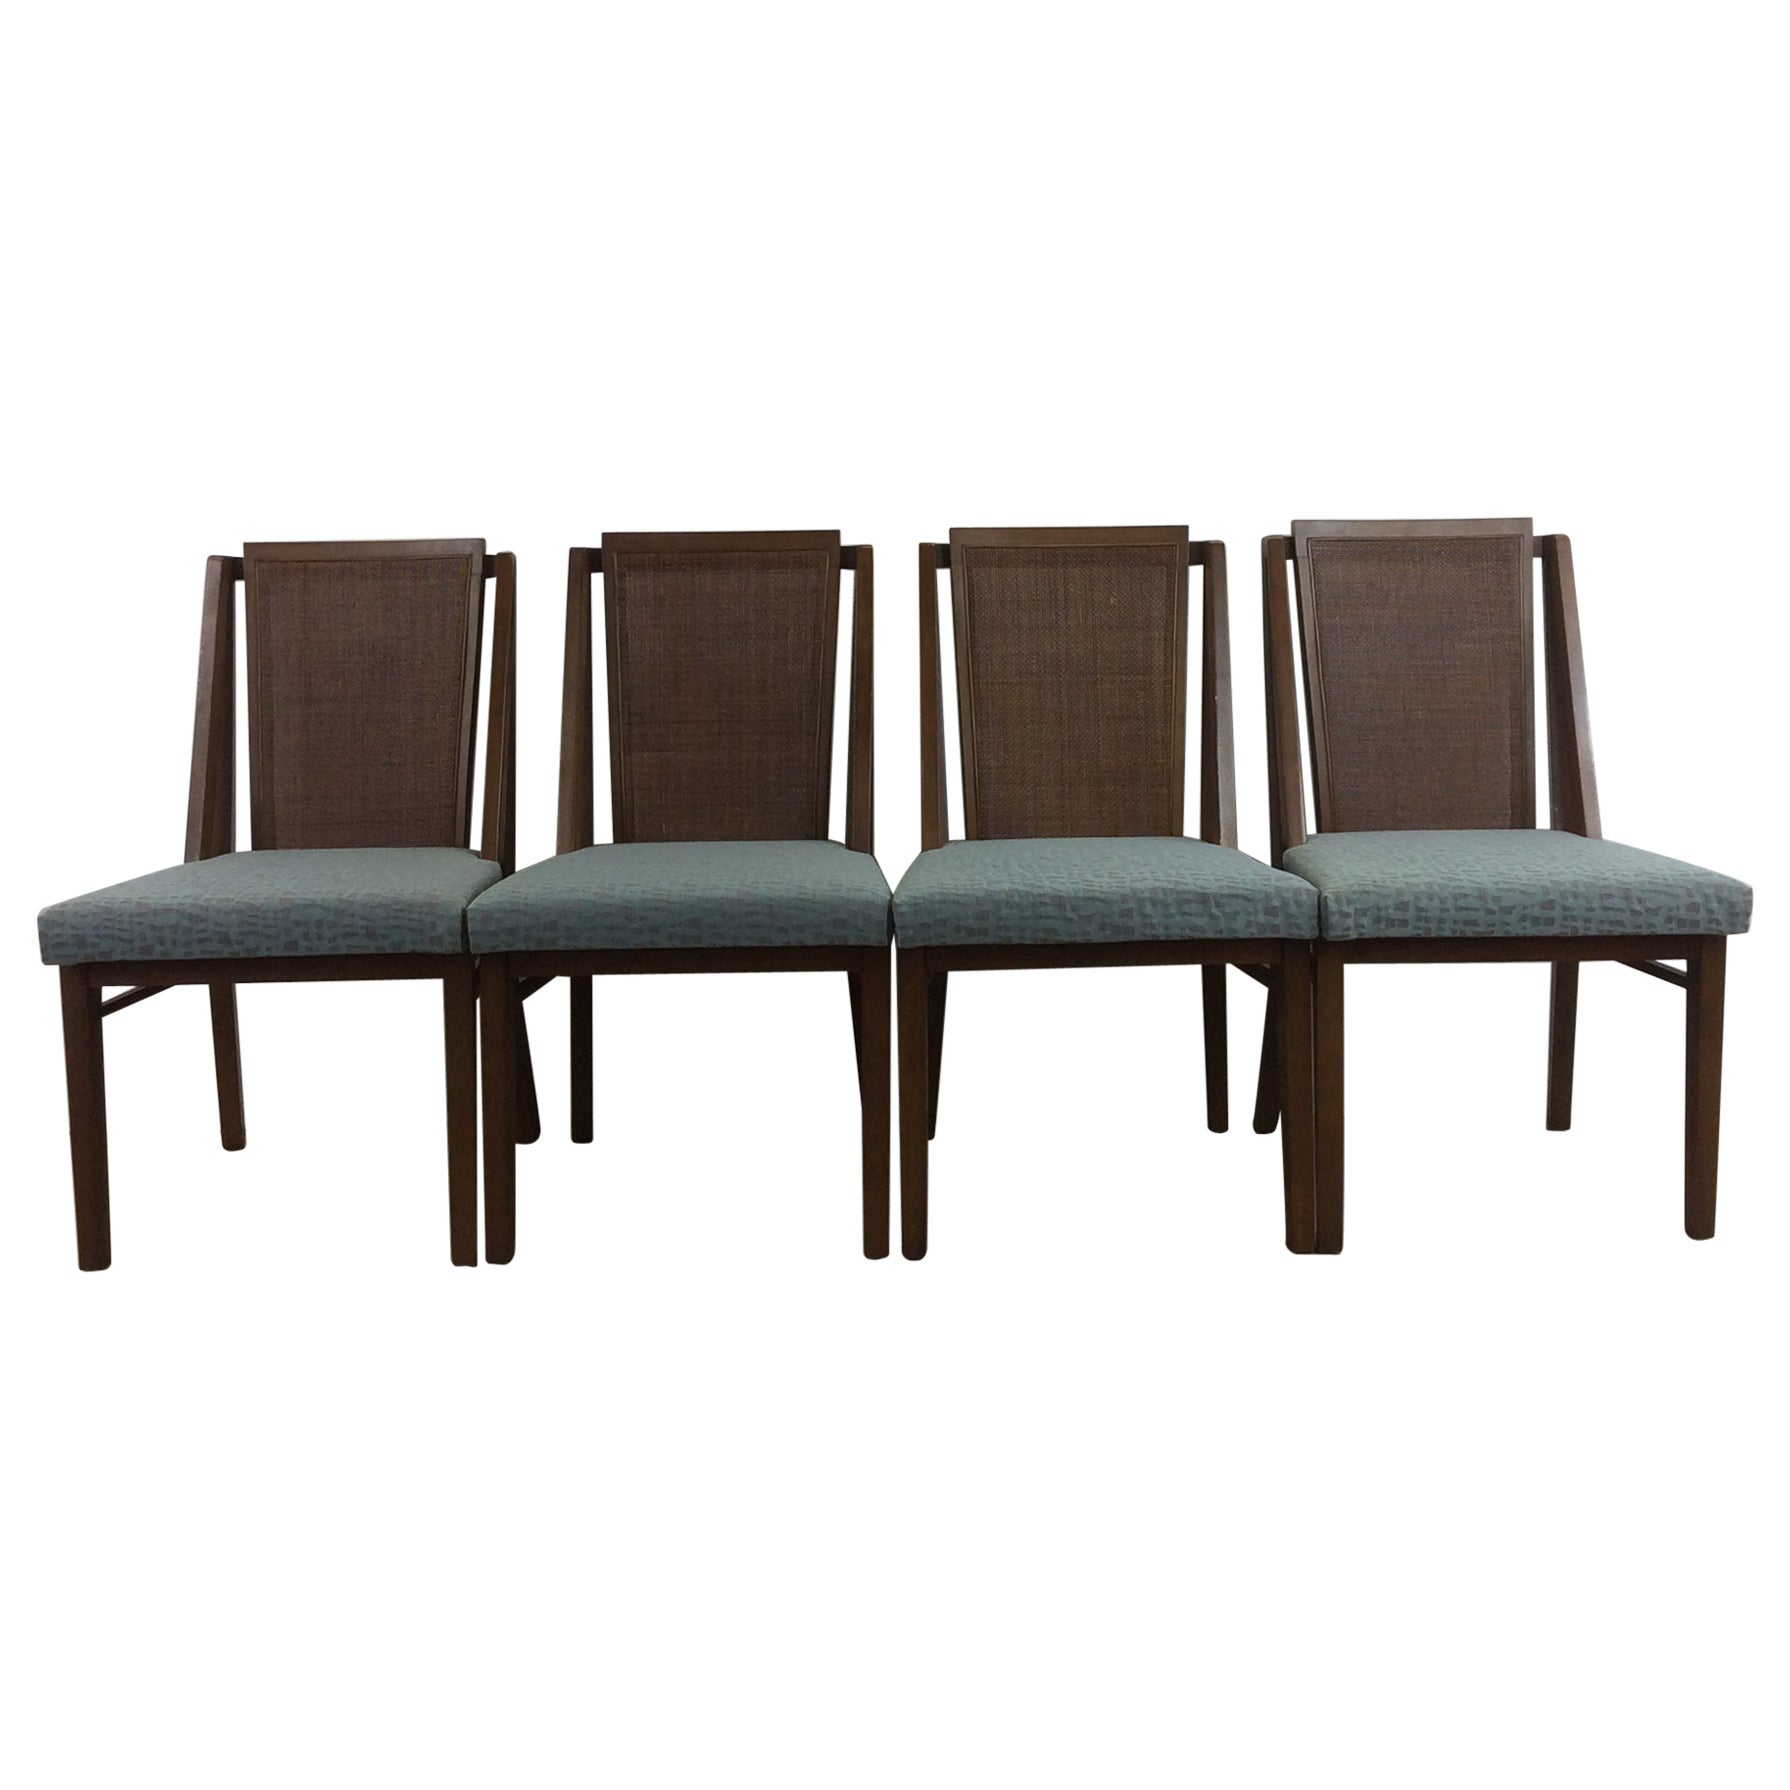 Set of 4 Mid-Century Modern Dining Room Chairs by Drexel